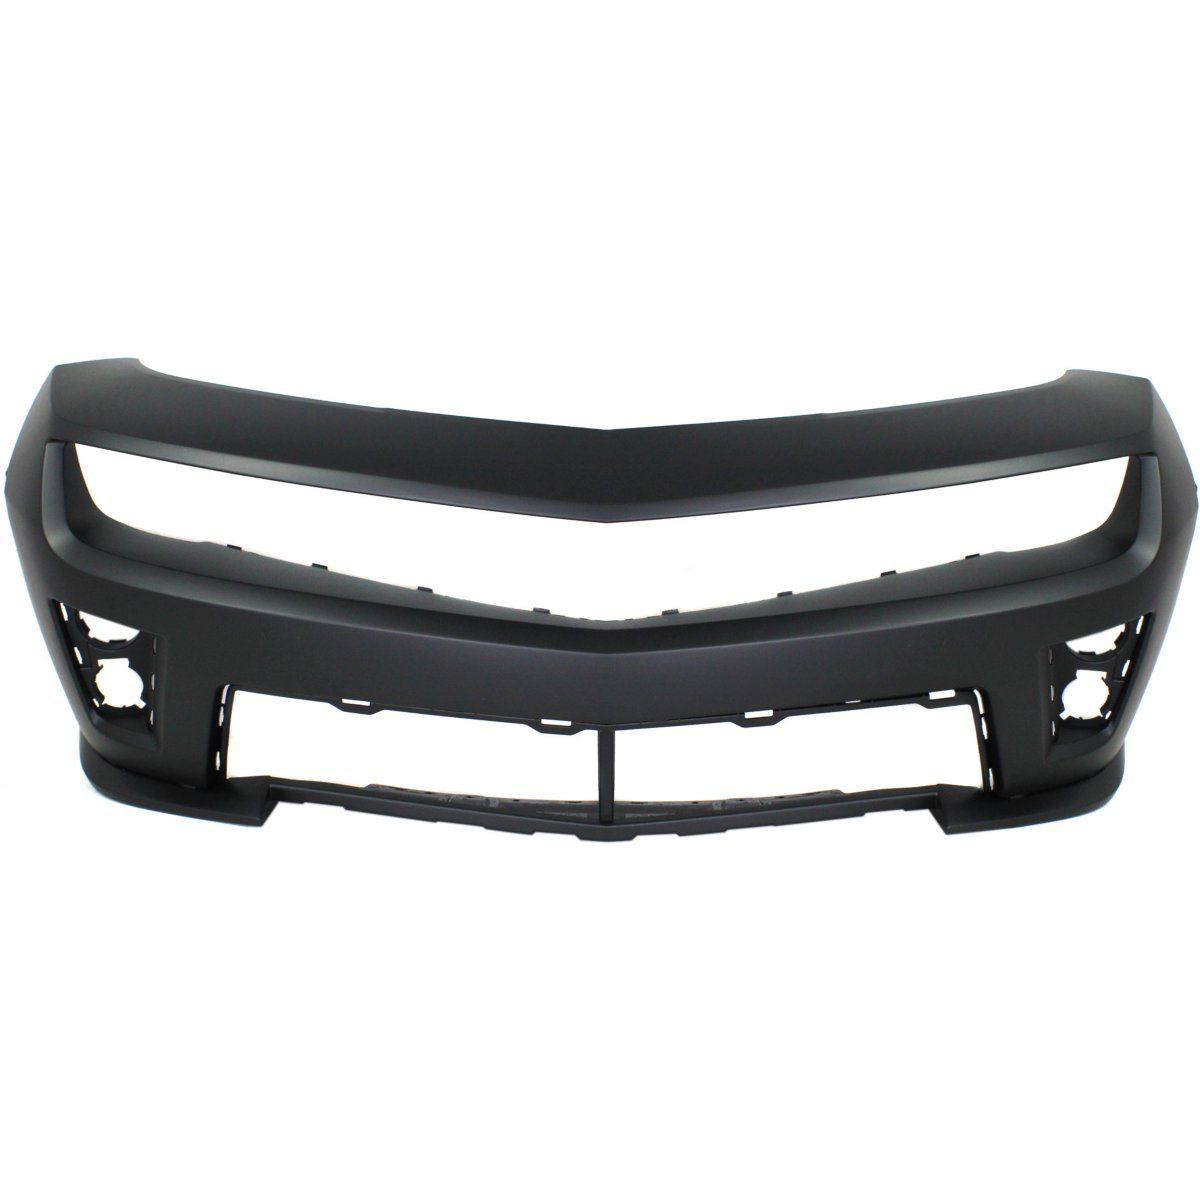 2010-2015 CHEVY CAMARO Front Bumper Cover Painted to Match